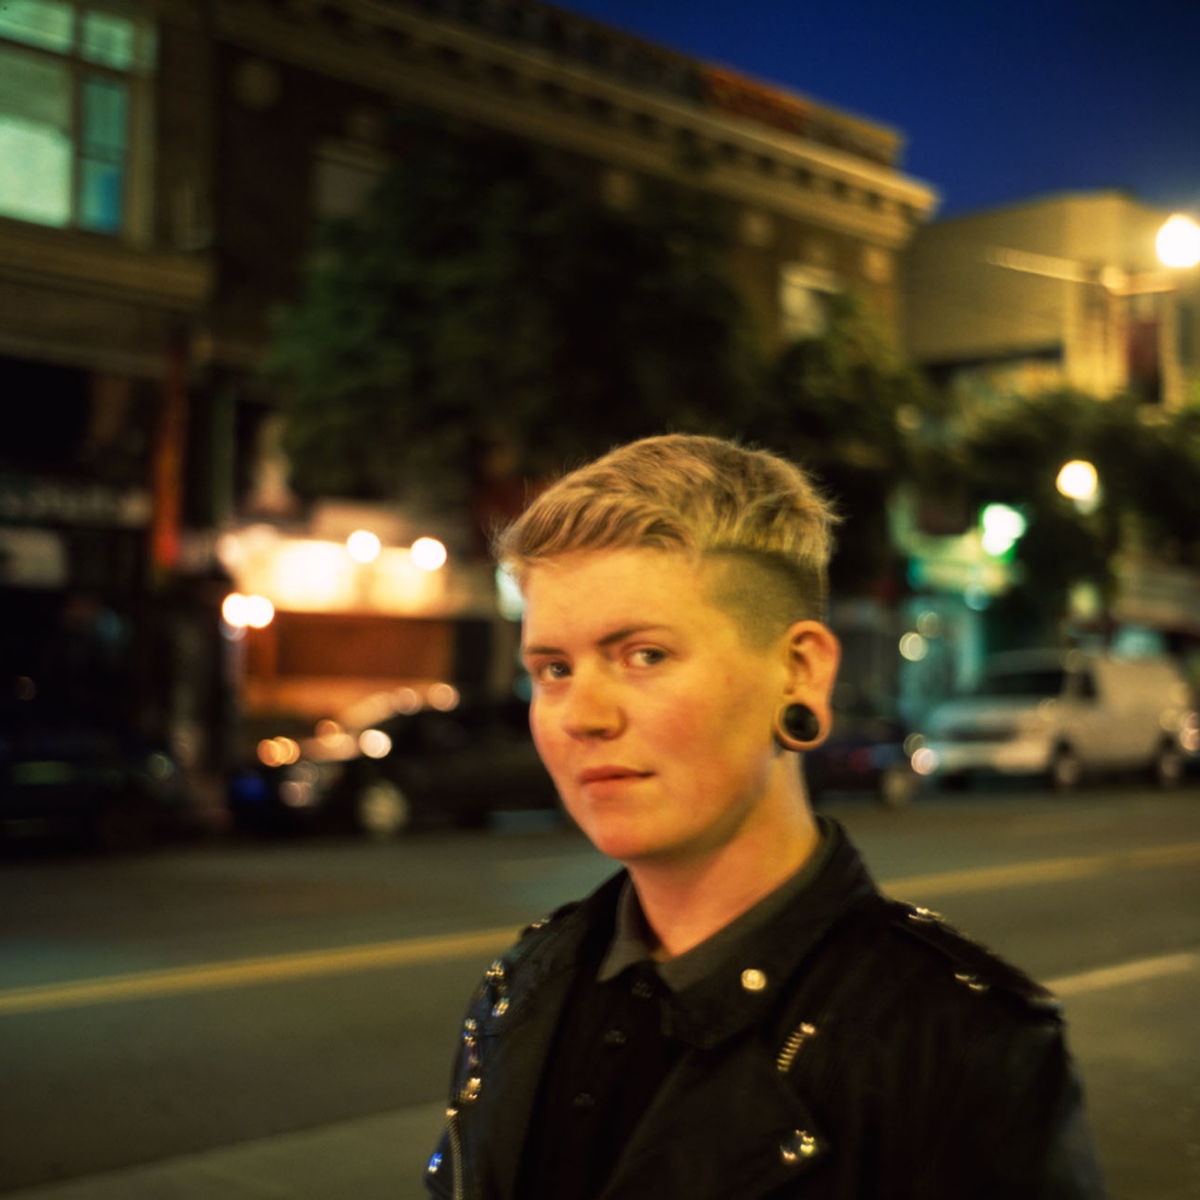 Portrait of a person facing away from a busy street. Frances Before Twilight, San Francisco, 2014.